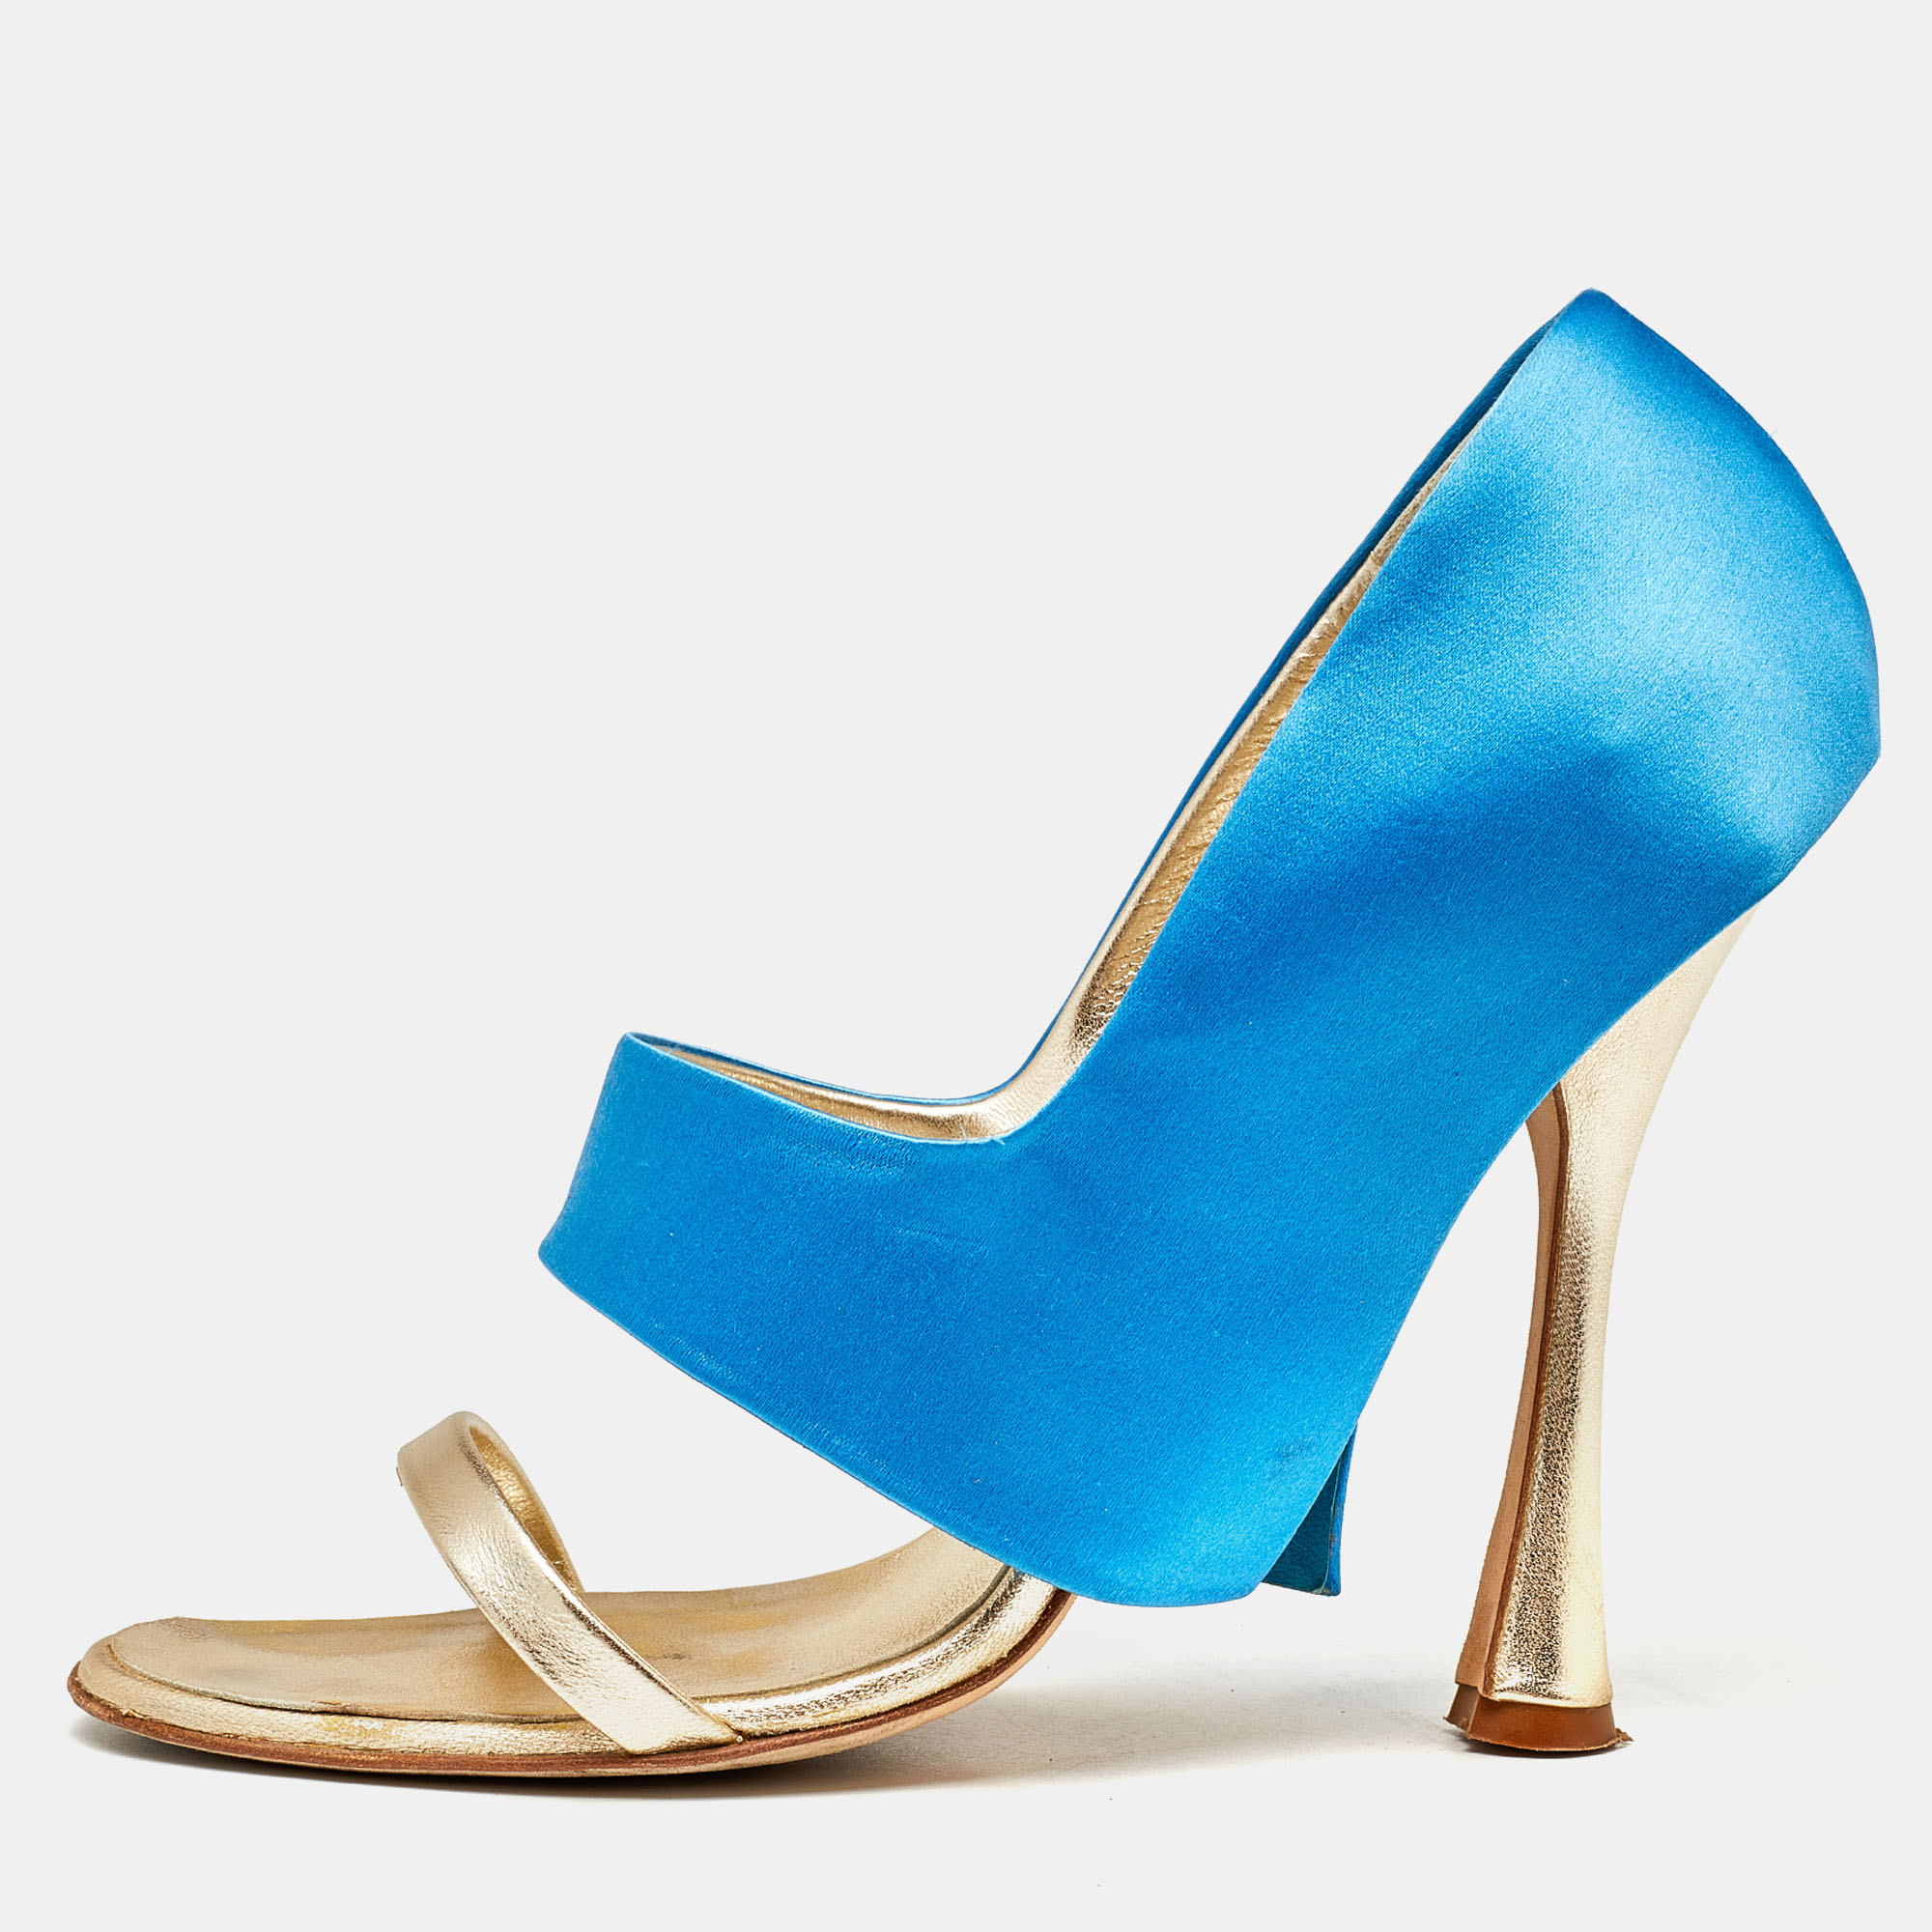 Manolo Blahnik Blue/Gold Satin And Leather Open Toe Sandals Size 39.5